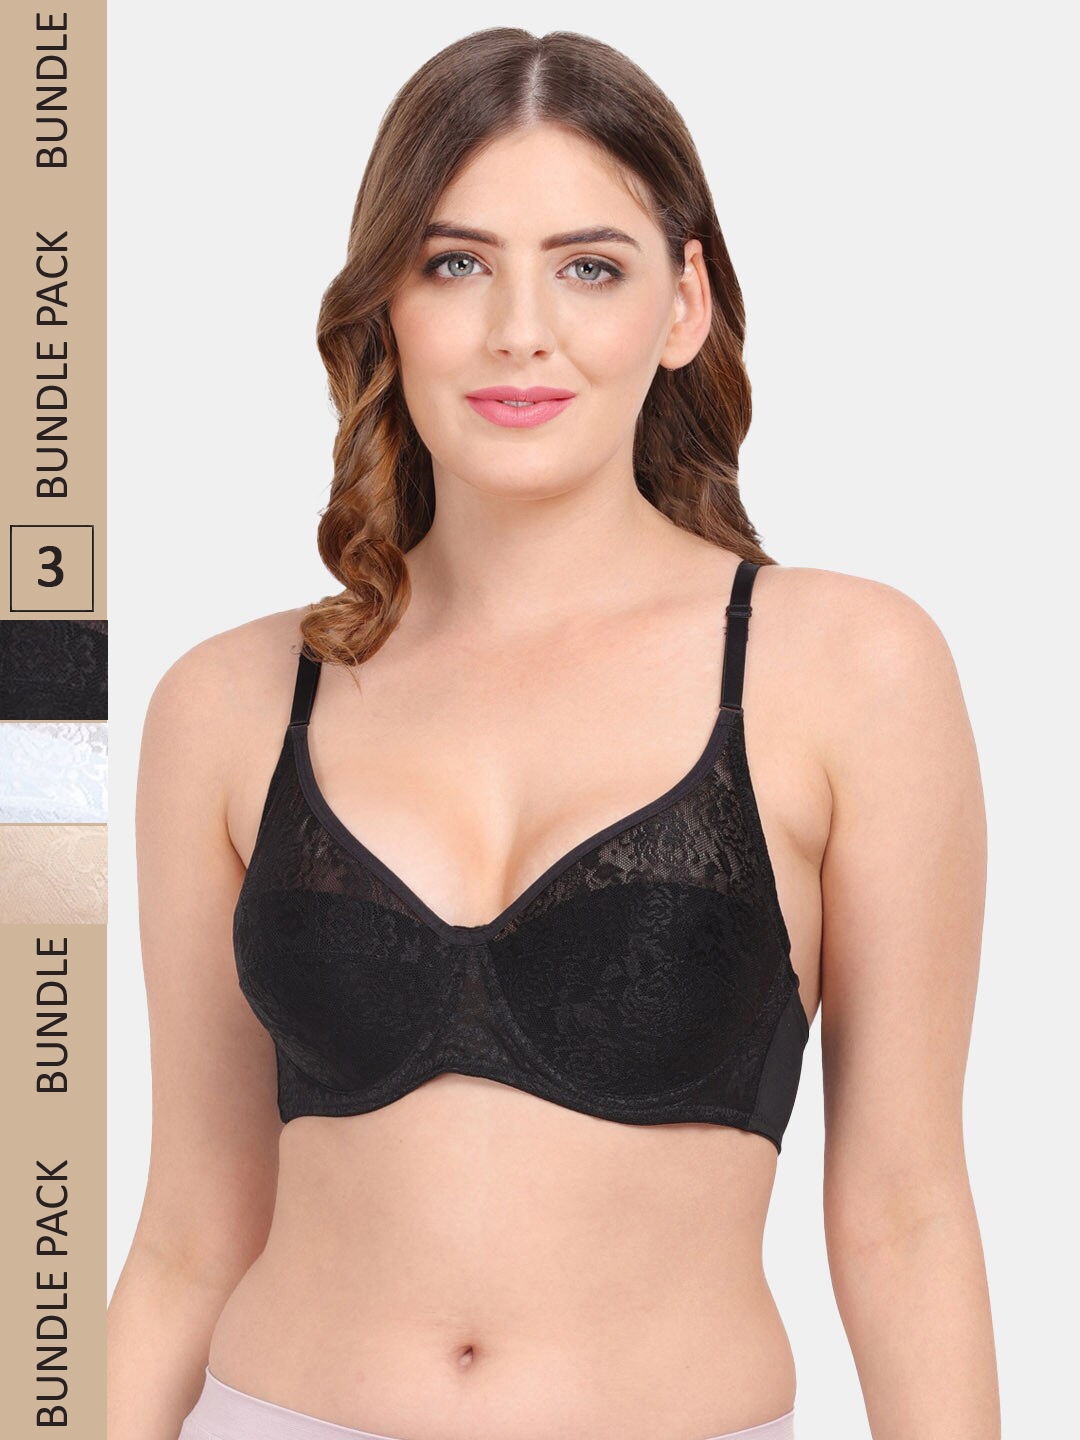 Buy N-Gal Non Padded Non Wired Medium + Coverage Lace Bra - Black